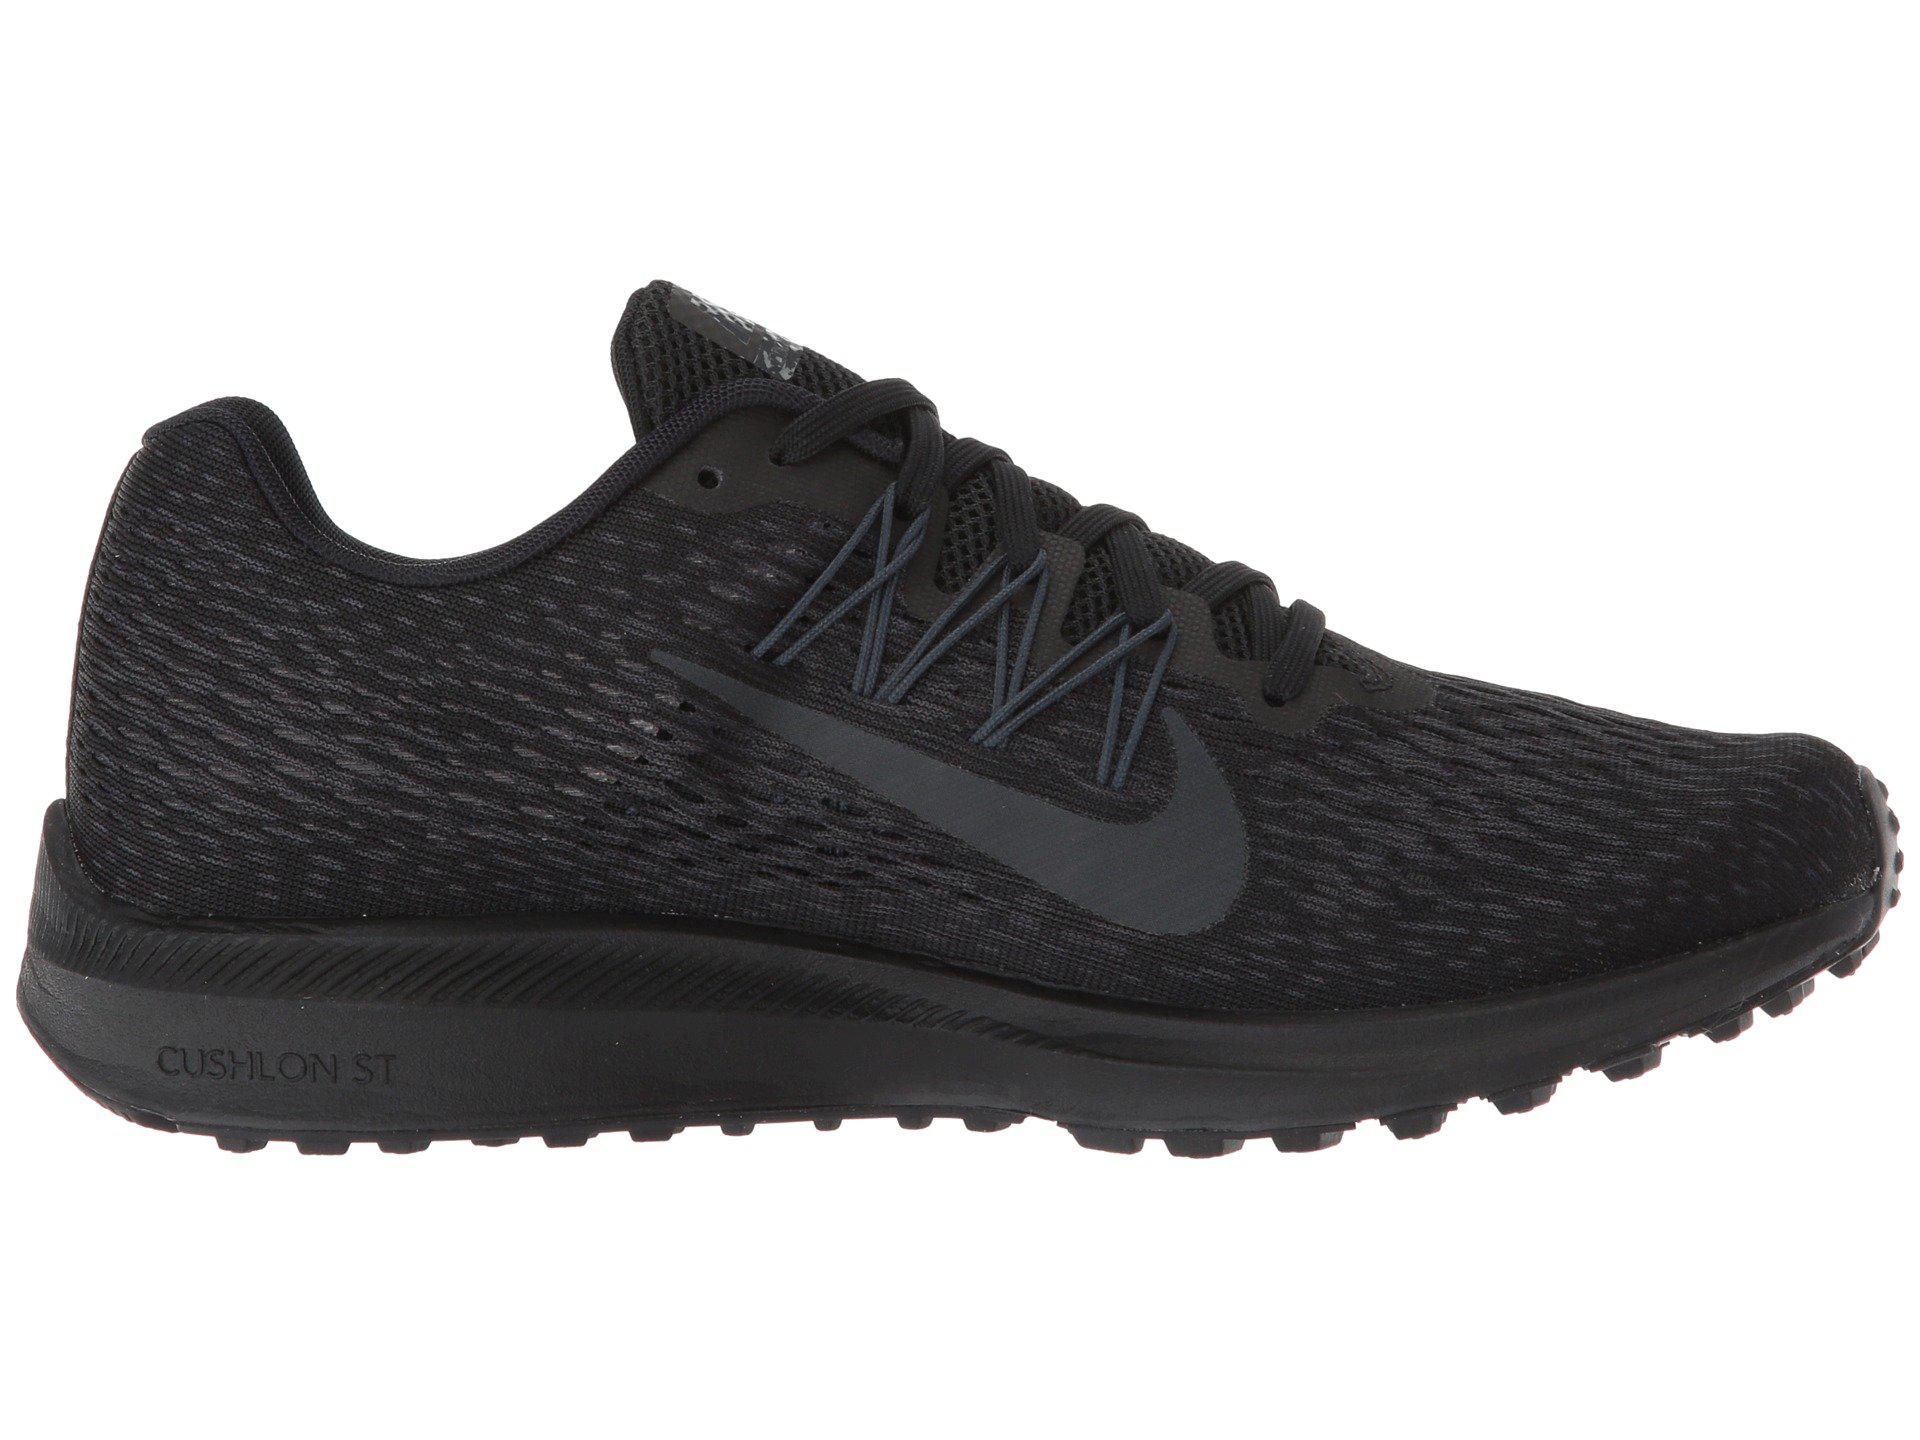 Nike Air Zoom Winflo 5 (black/anthracite) Running Shoes | Lyst